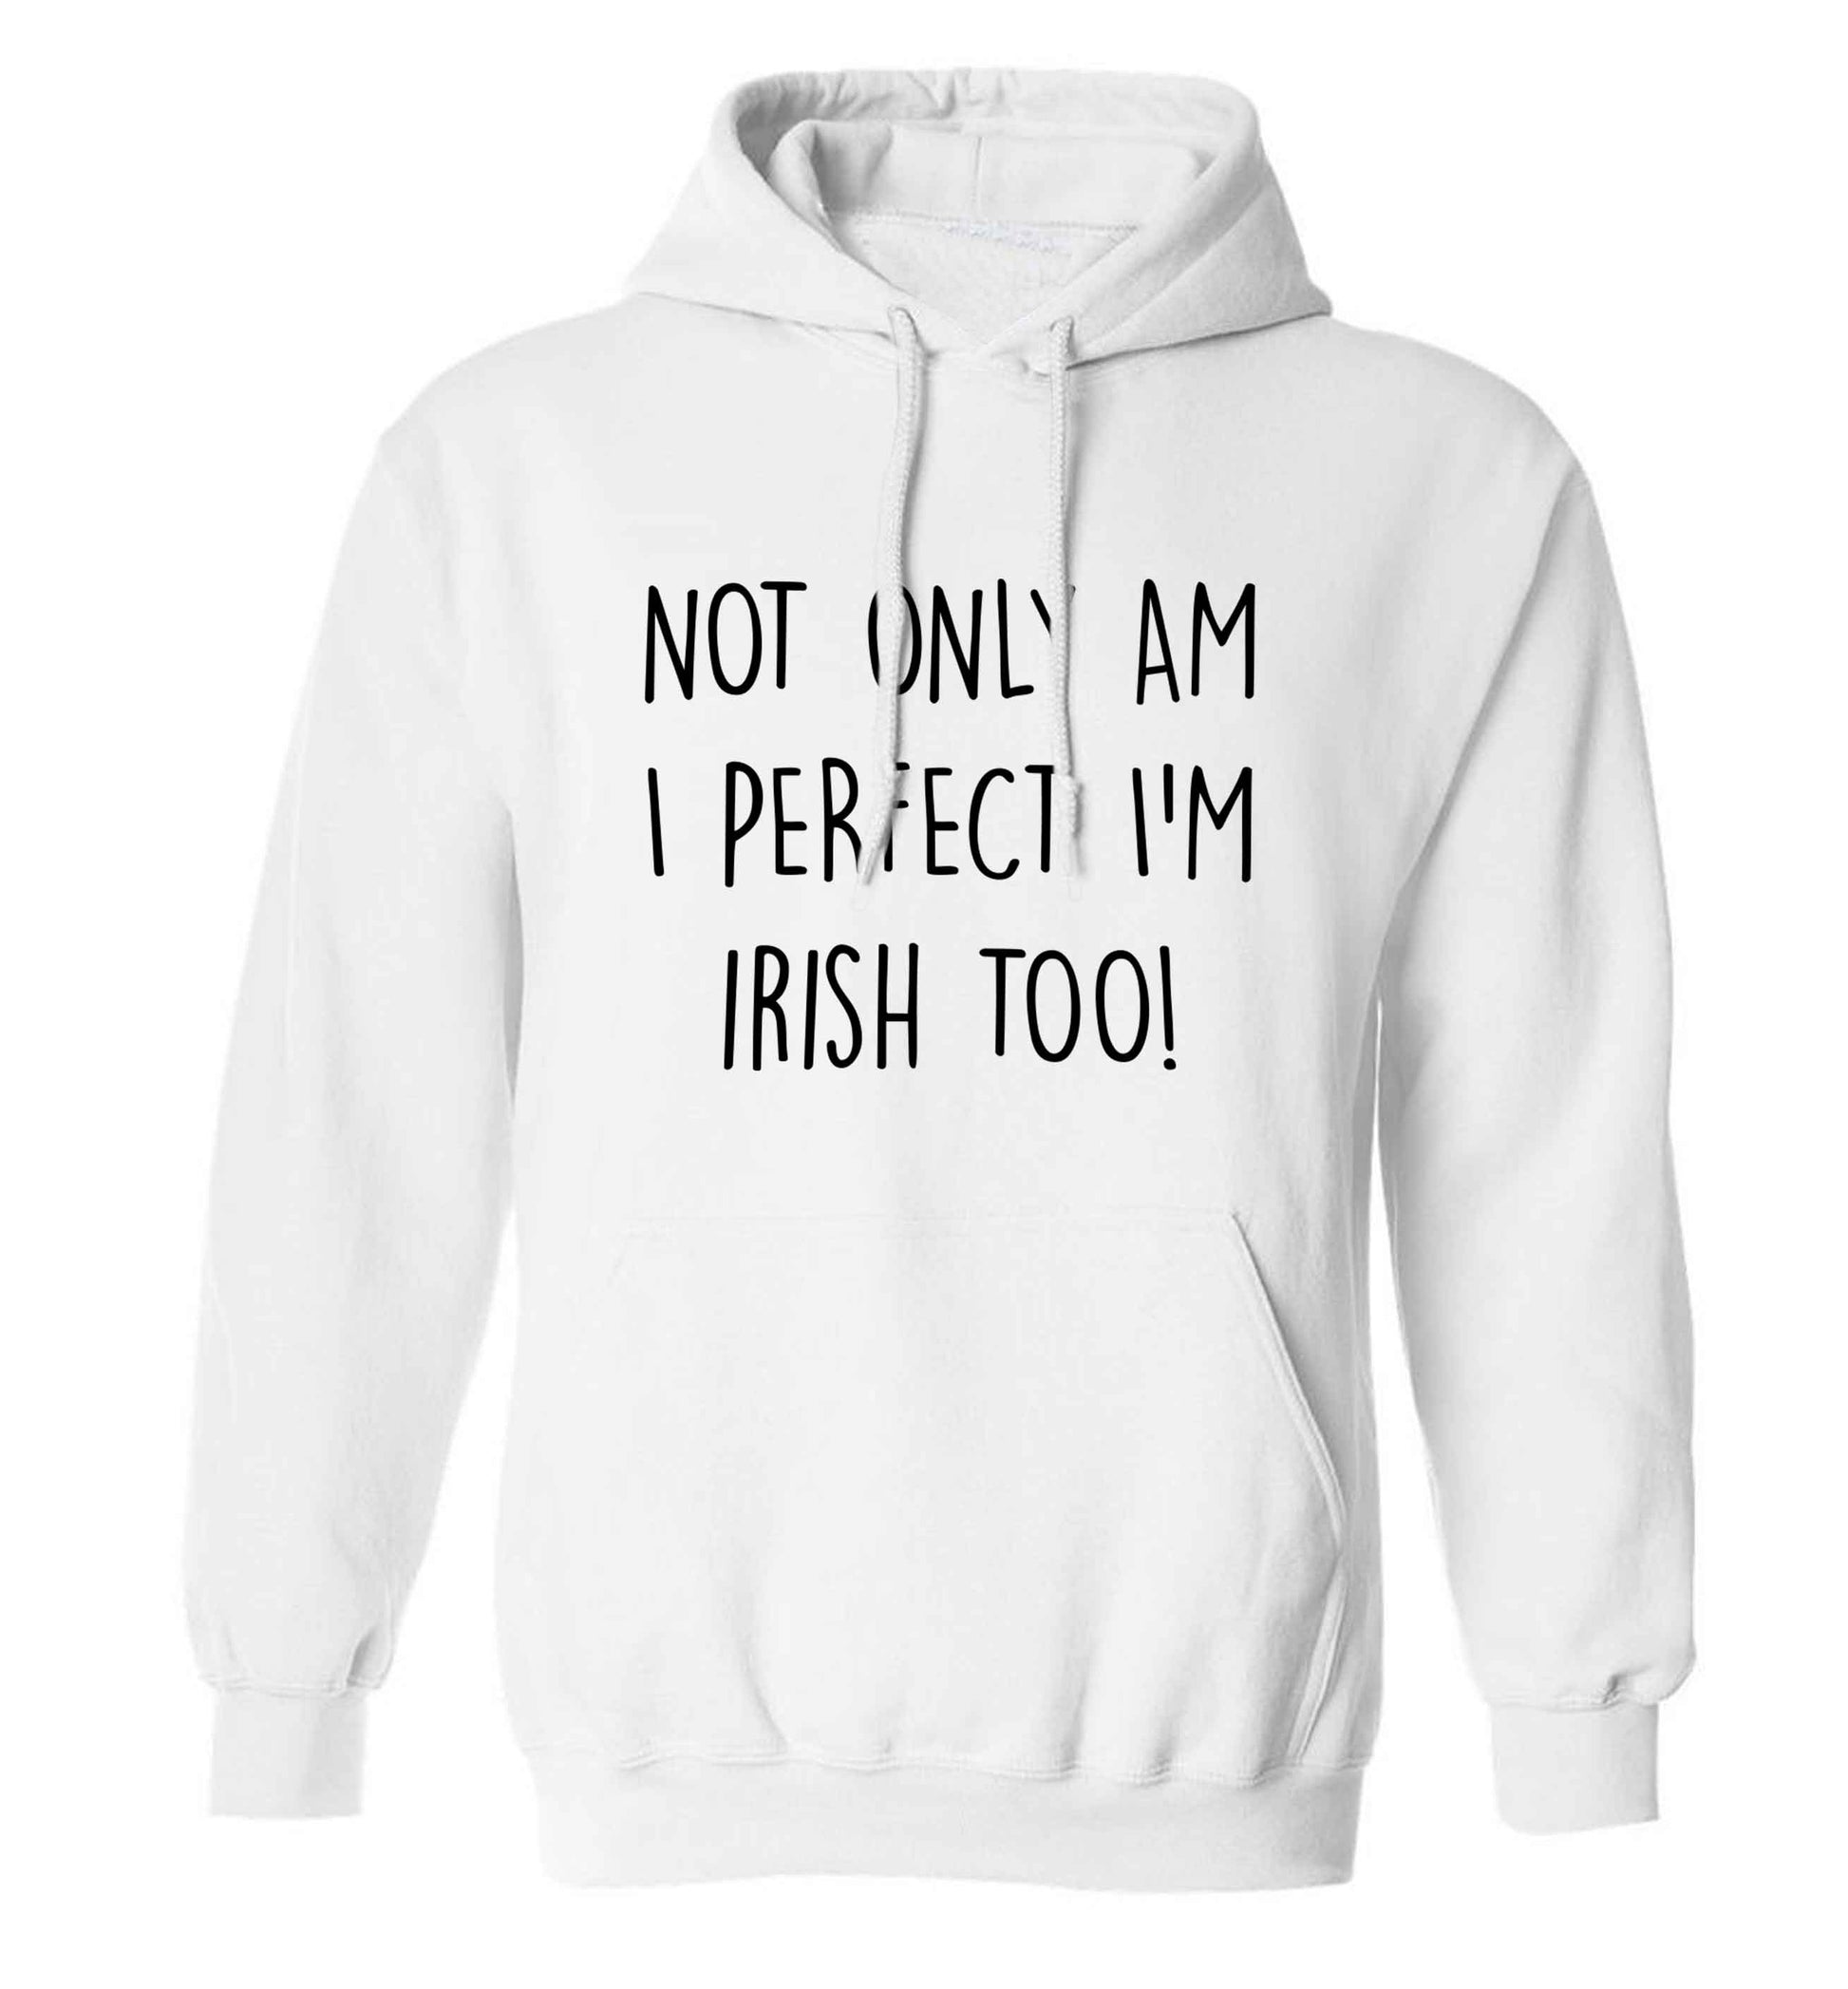 Not only am I perfect I'm Irish too! adults unisex white hoodie 2XL